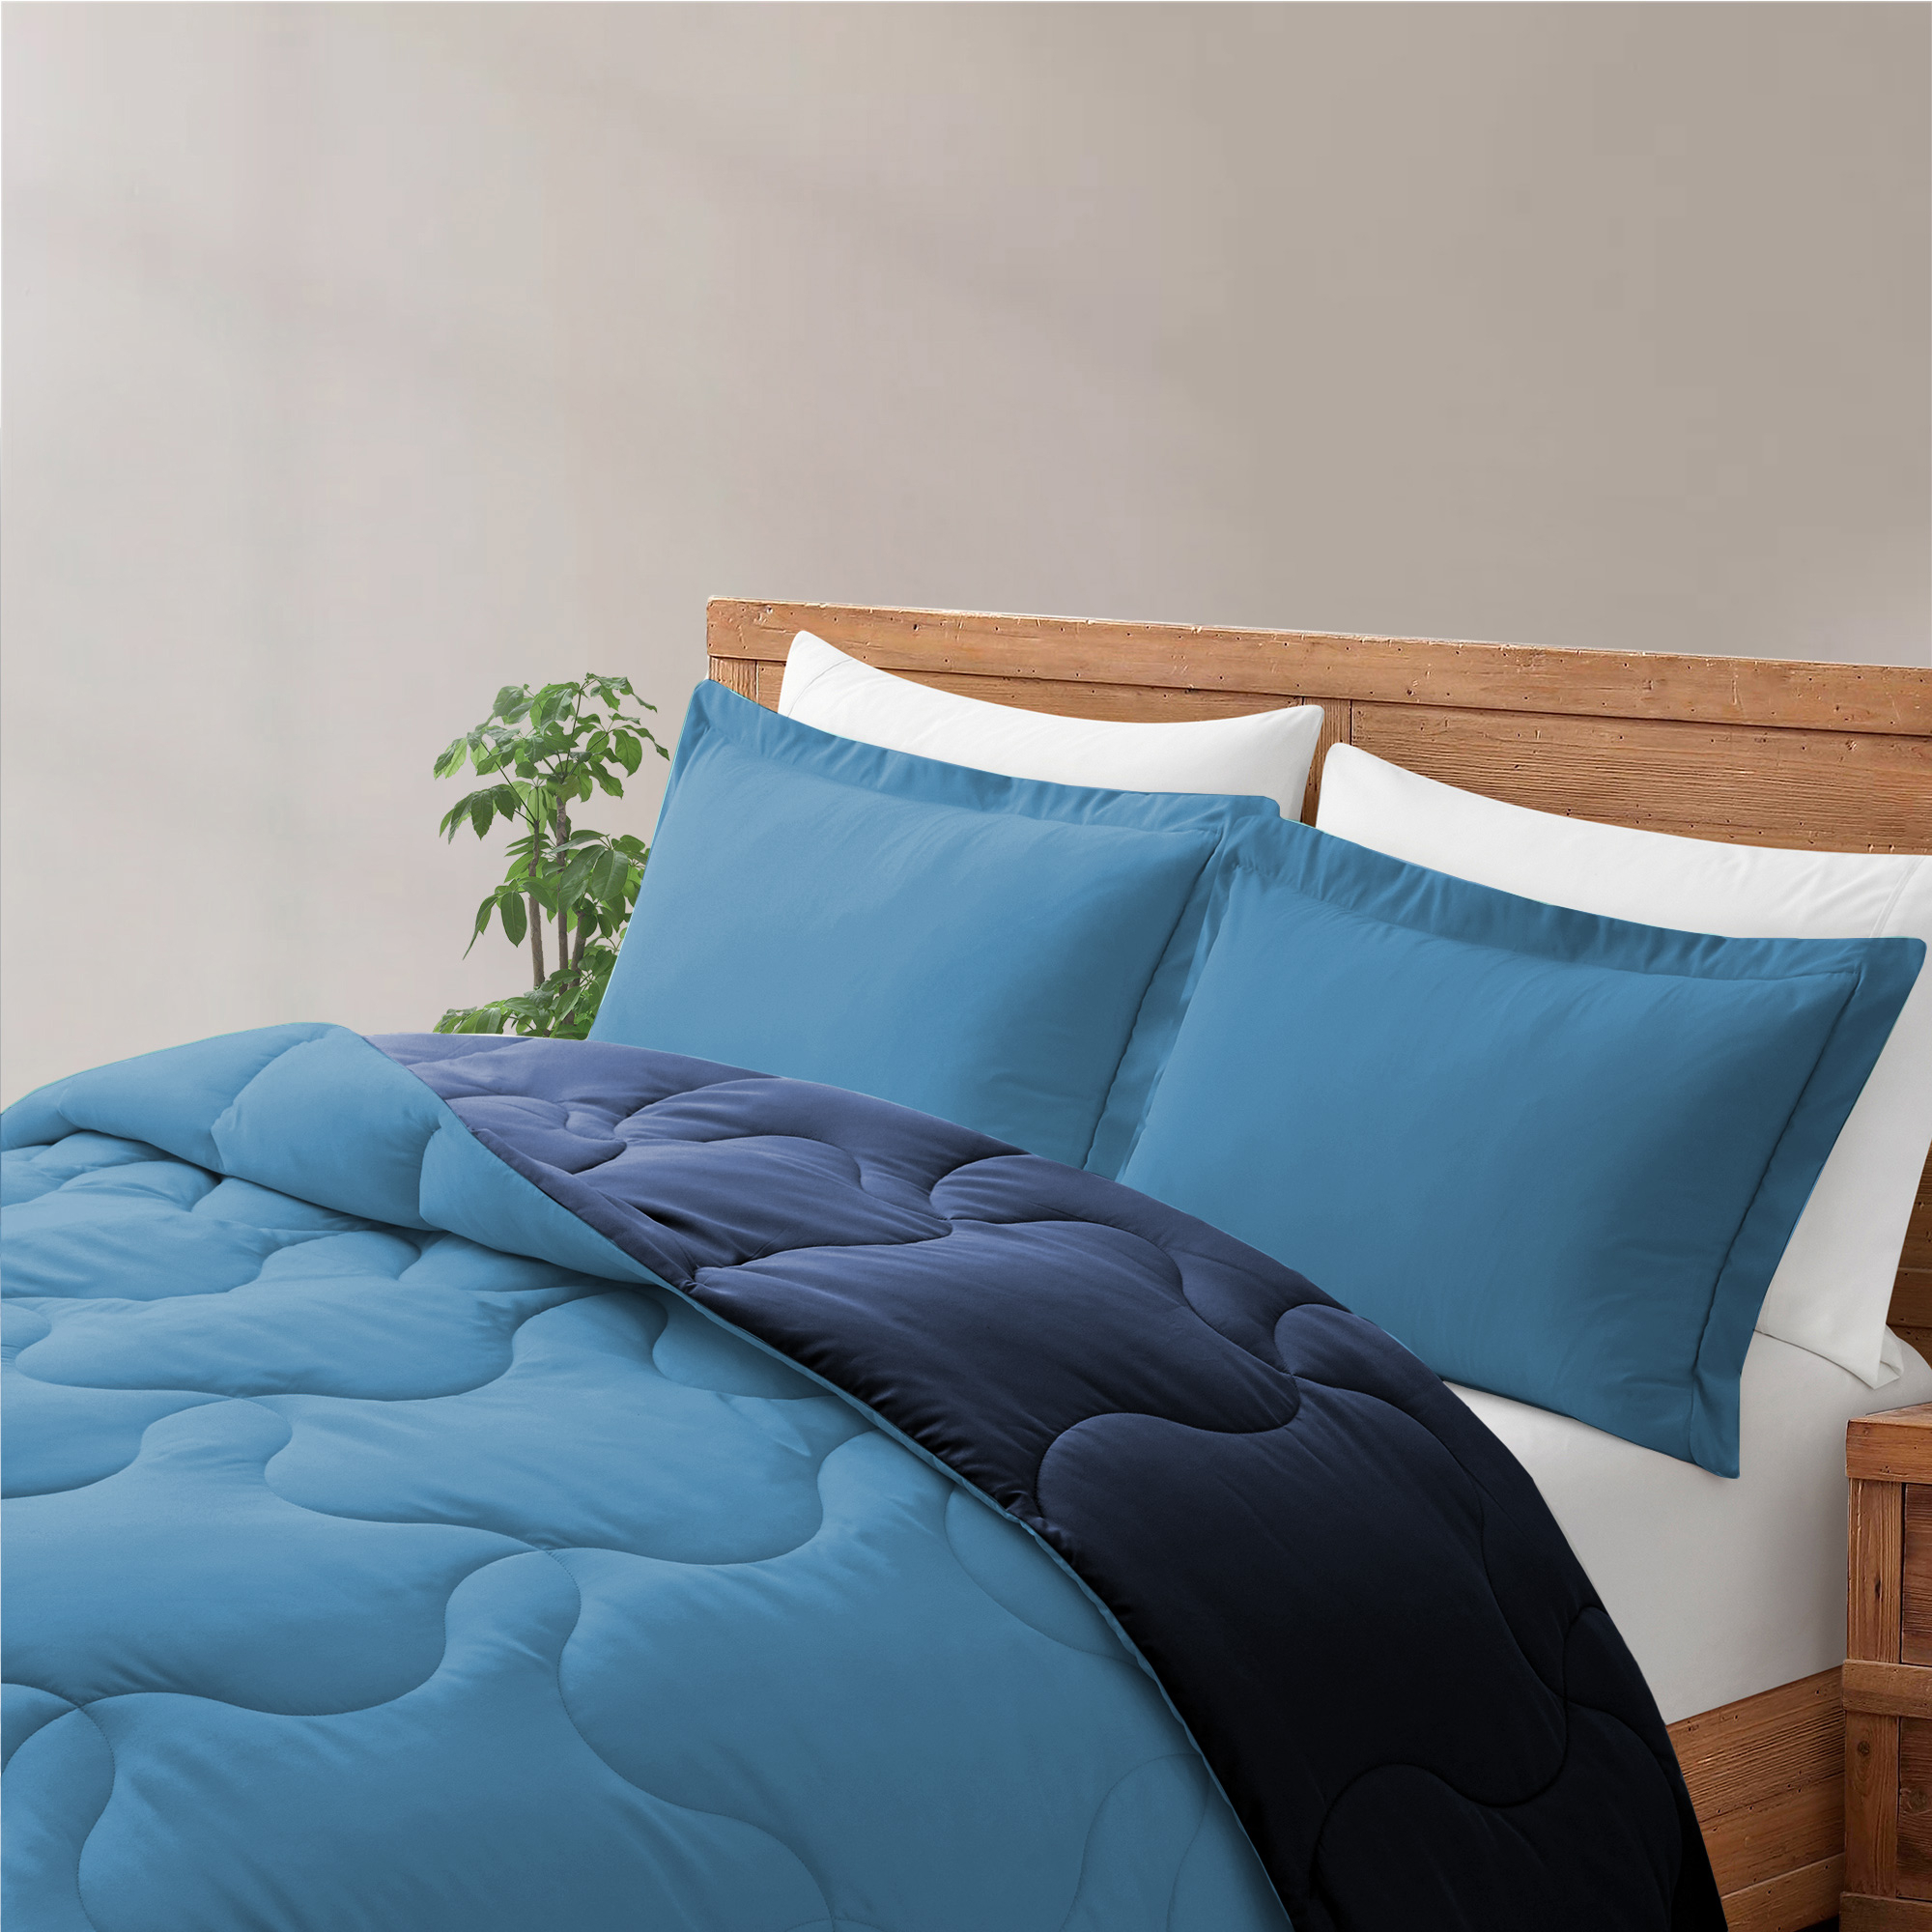 Lightweight Soft Quilted Down Alternative Comforter Reversible Duvet Insert With Corner Tabs - King Size